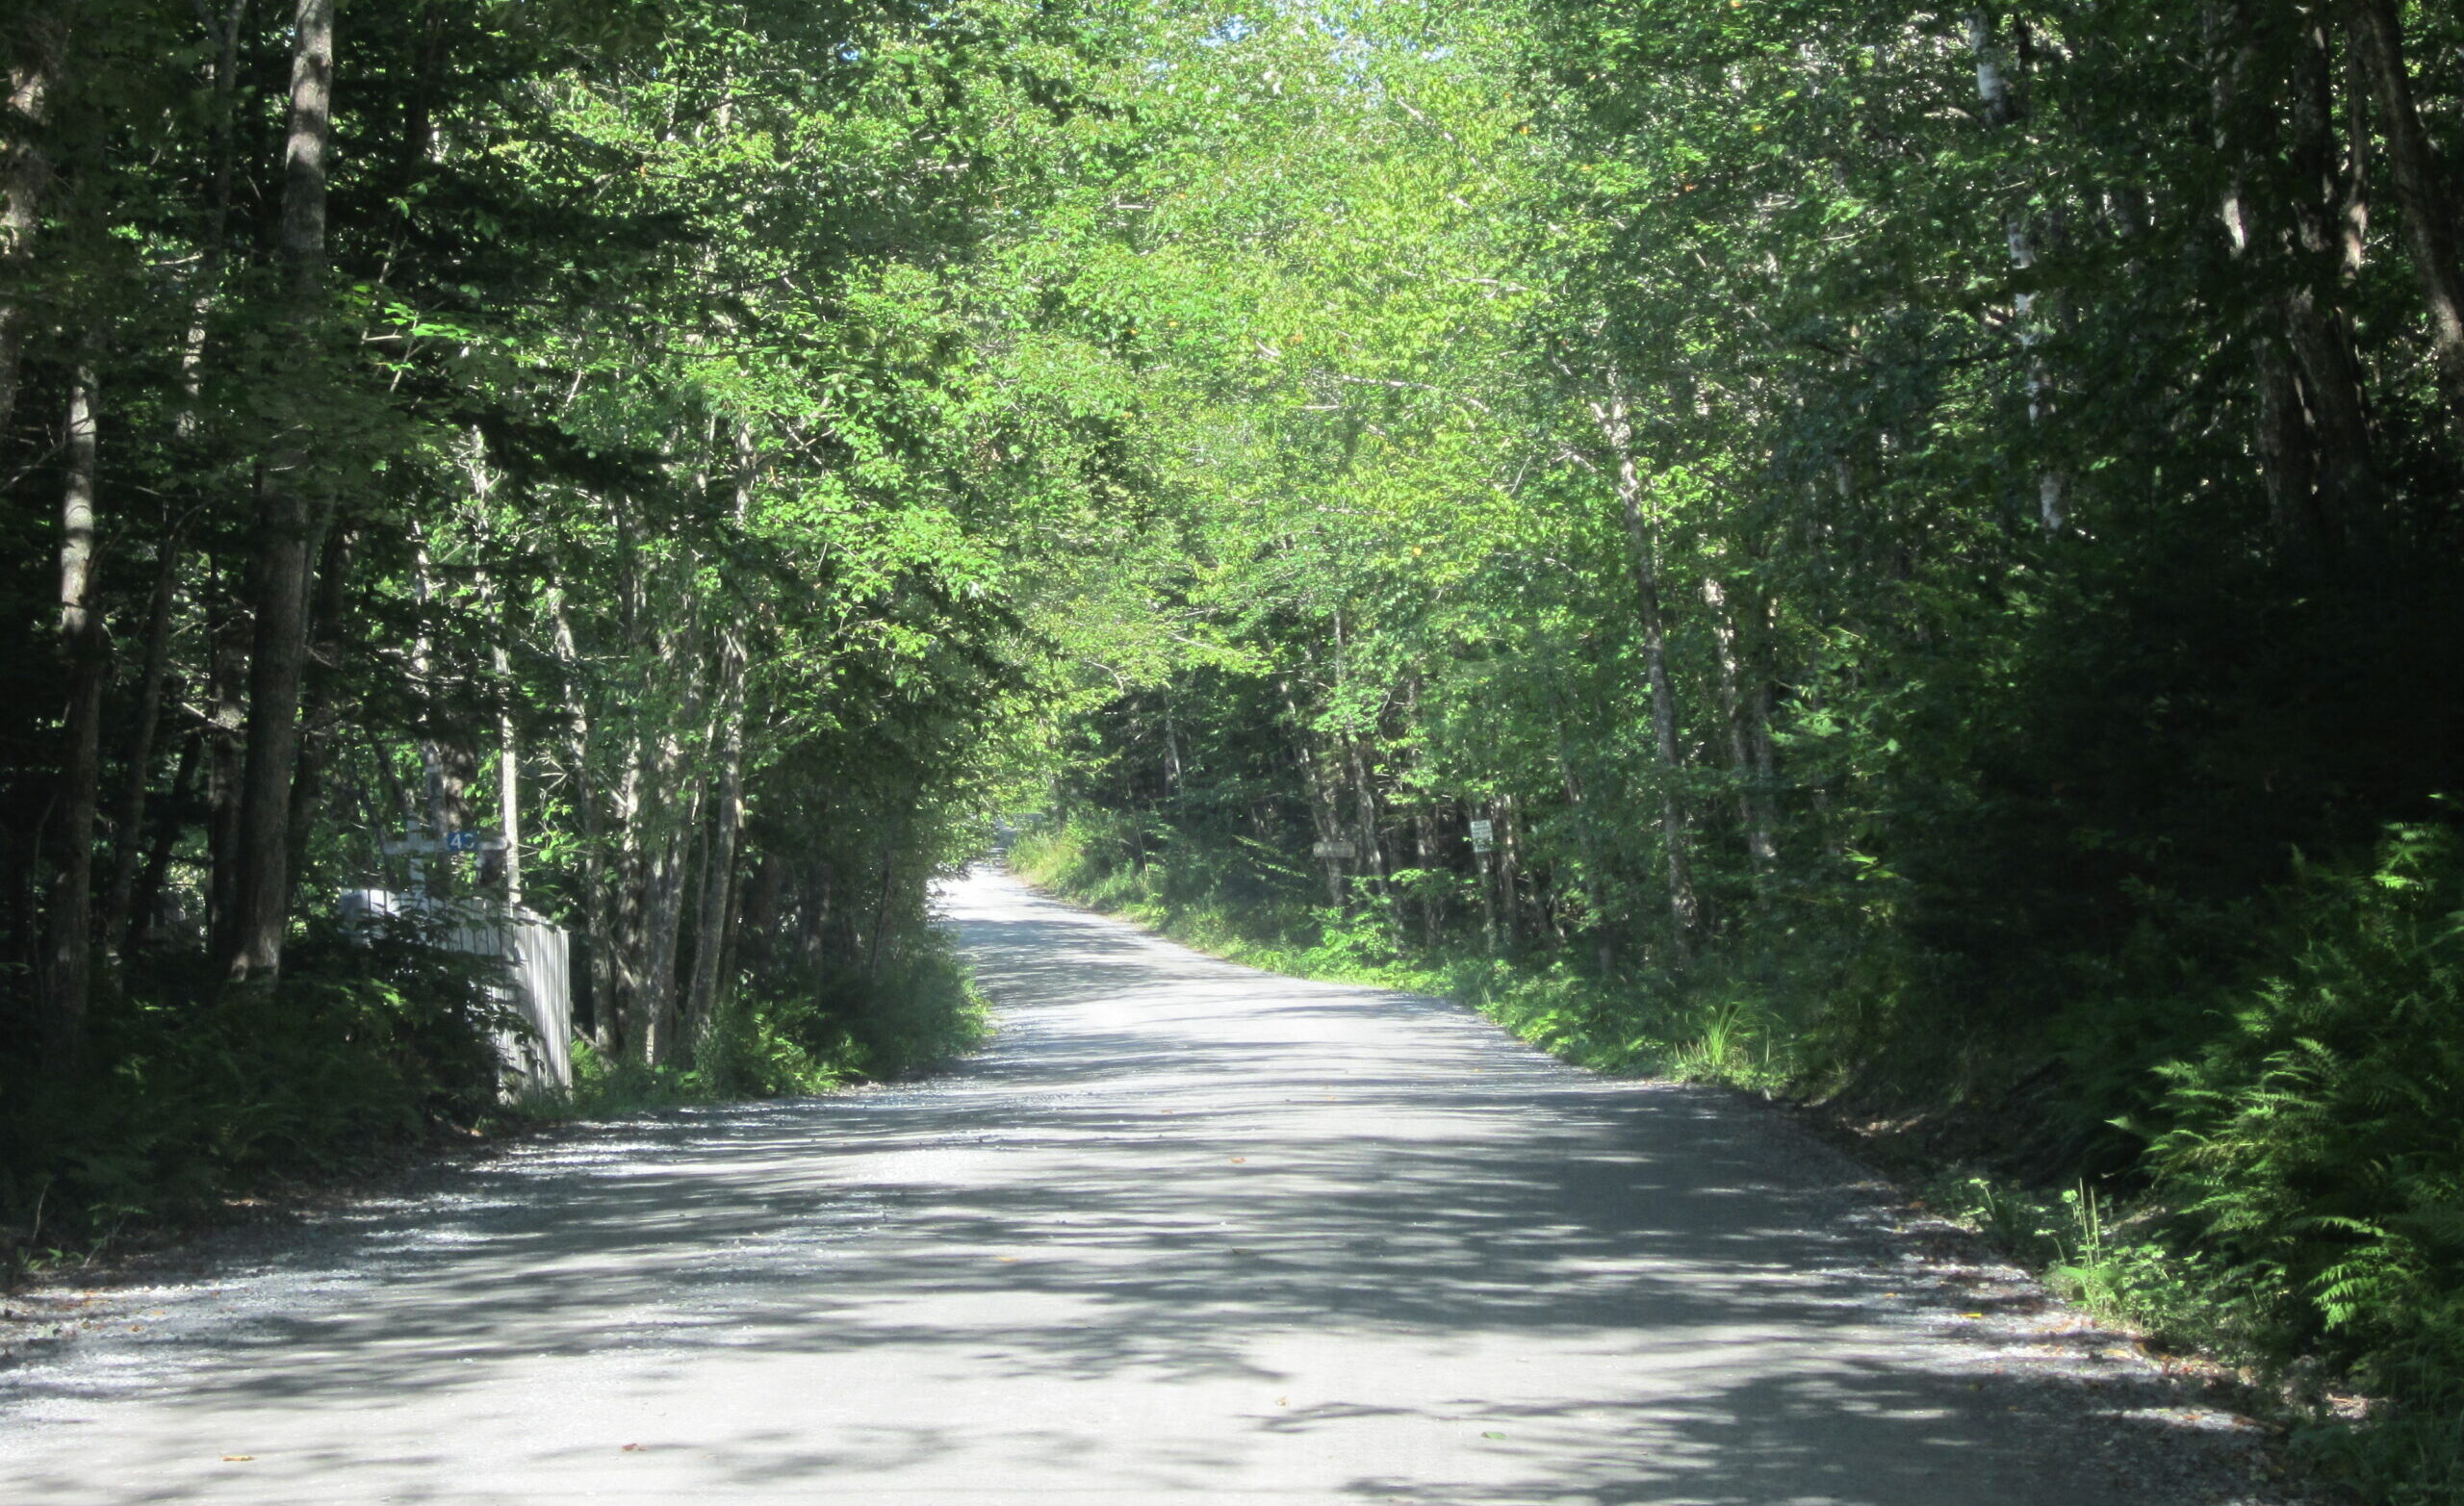 A gravel road shaded by leafy trees